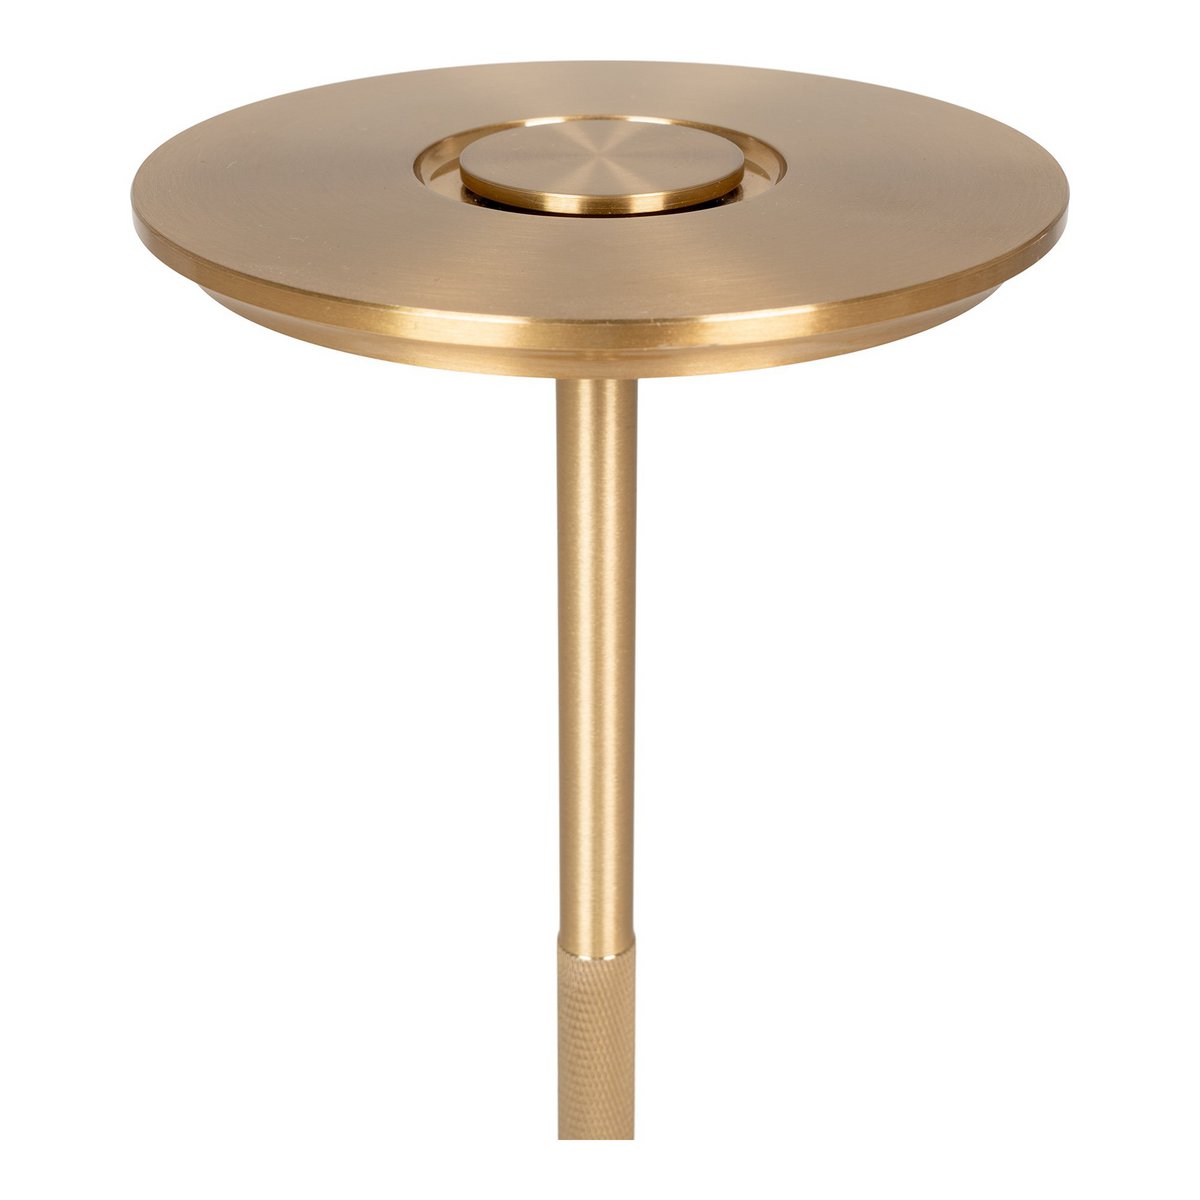 Shipham LED Table Lamp  - Table Lamp, rechargeable, brass